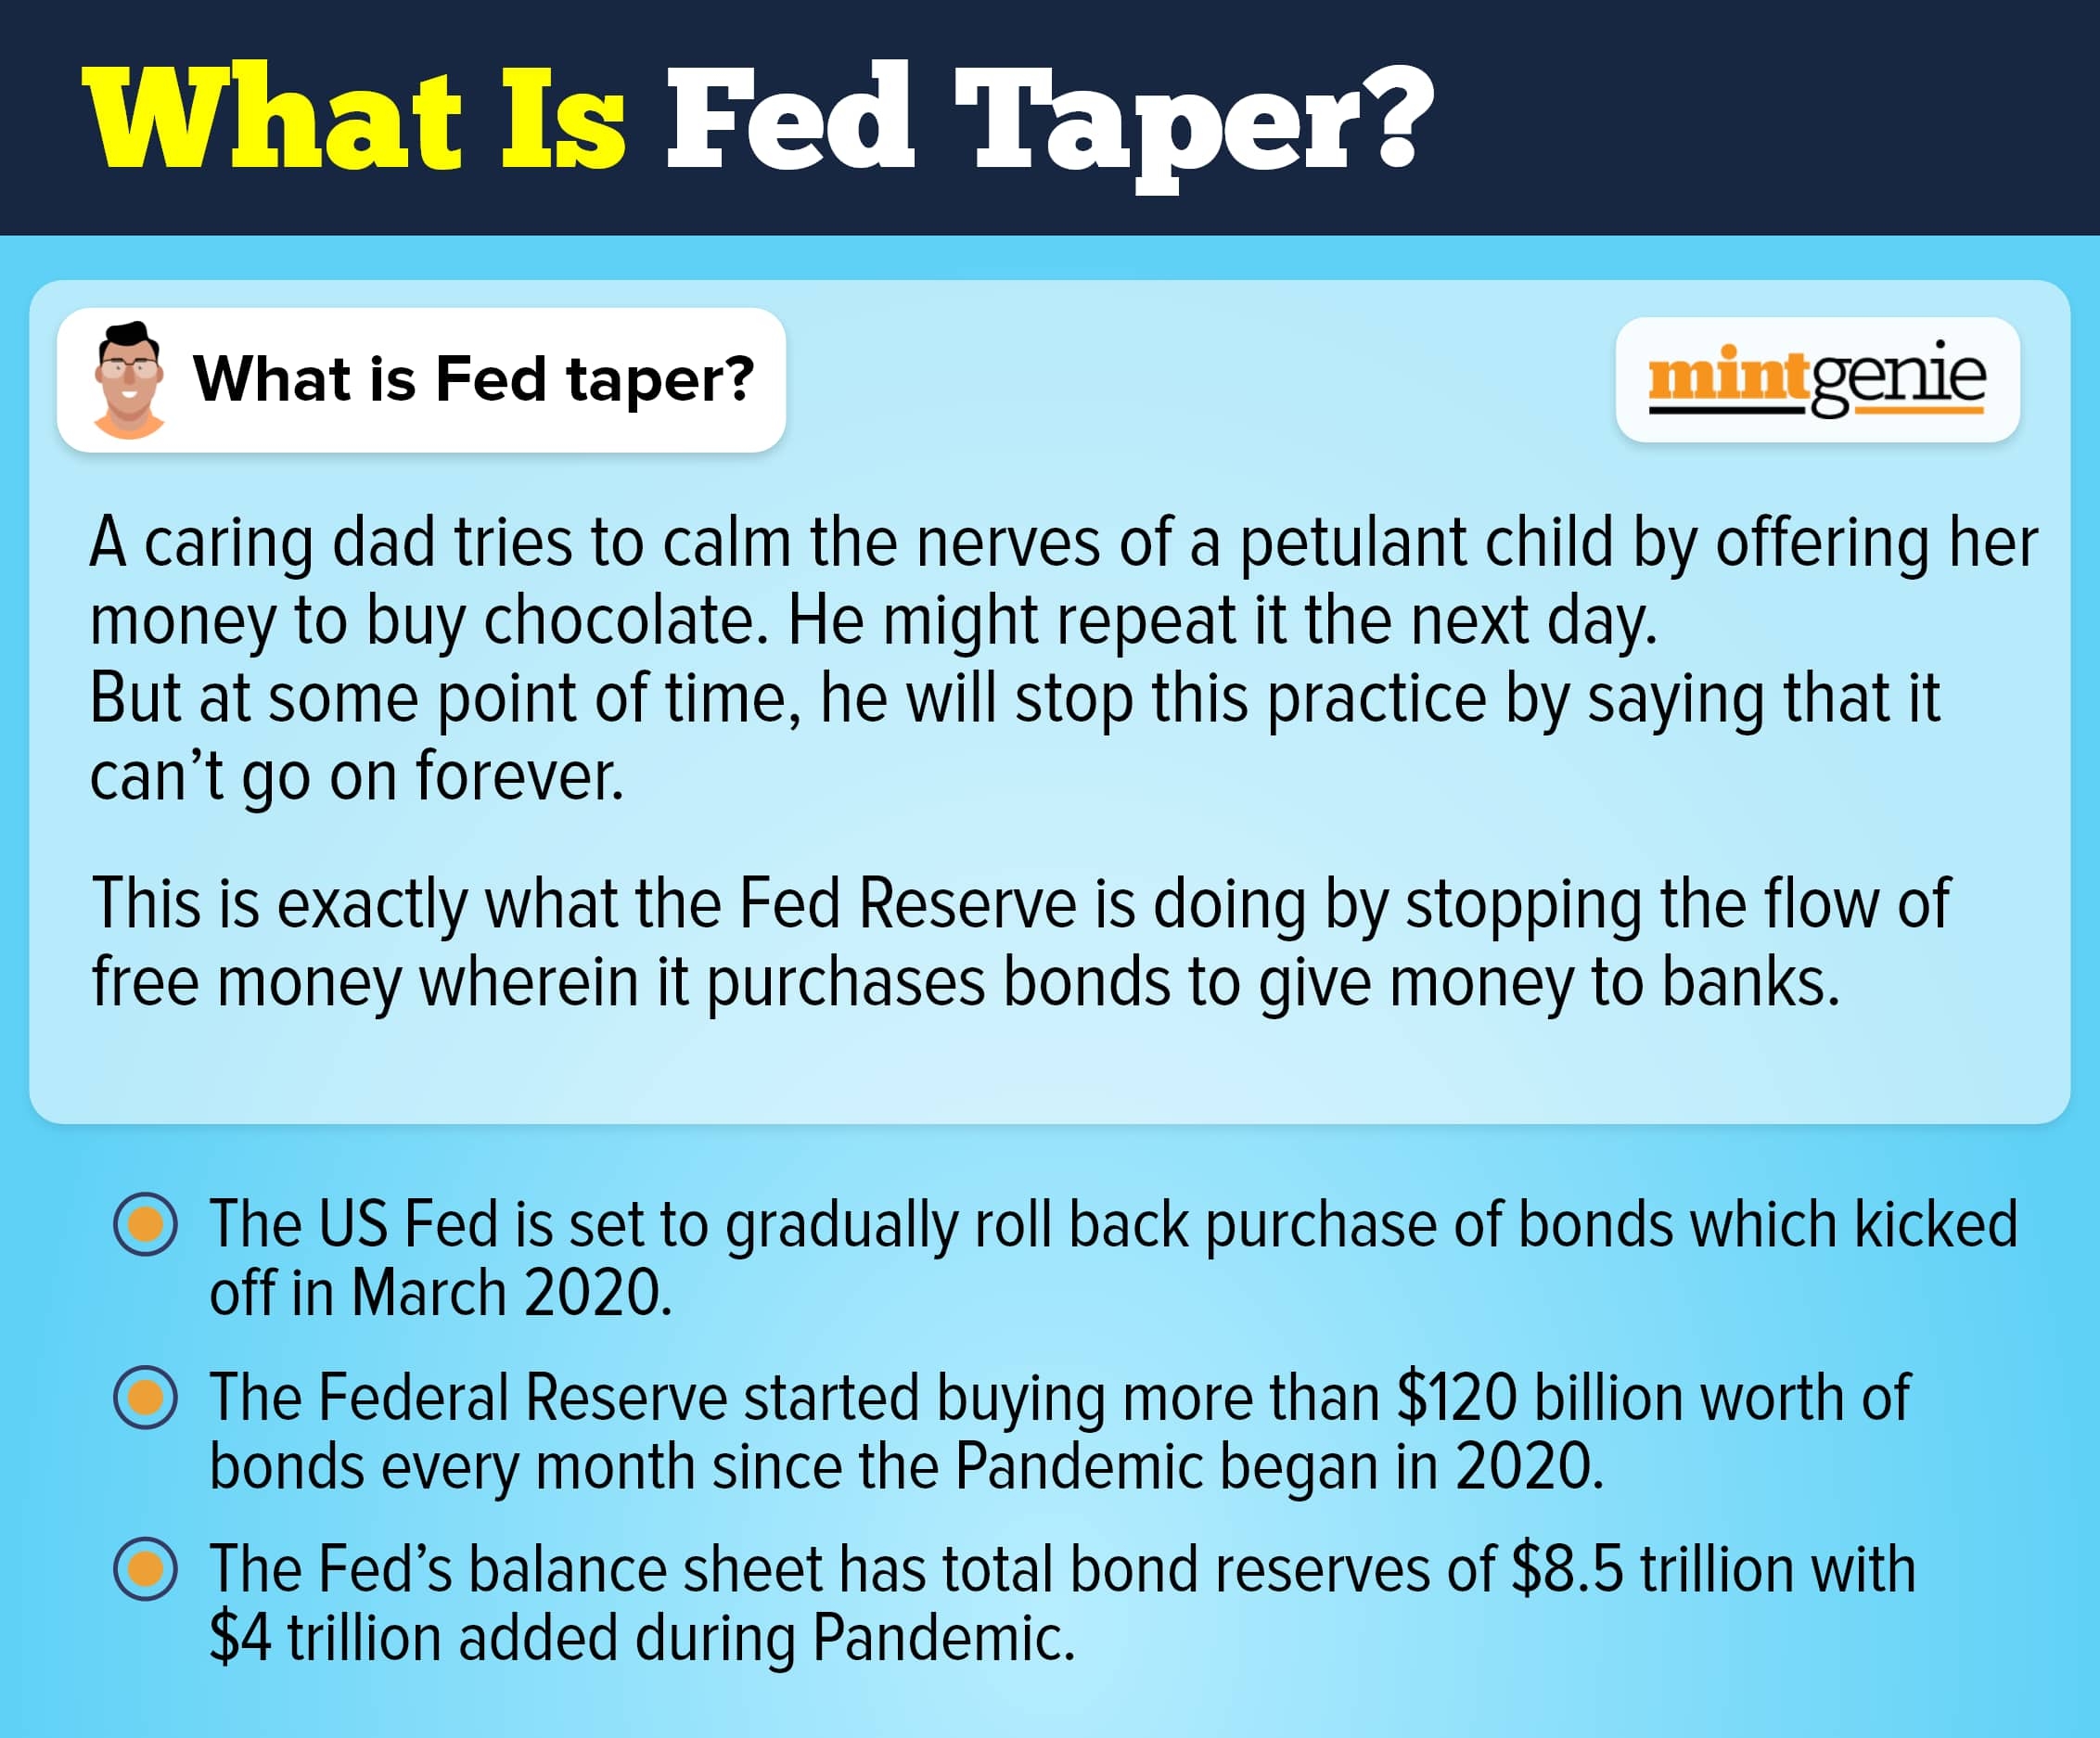 We explain here what is Fed taper